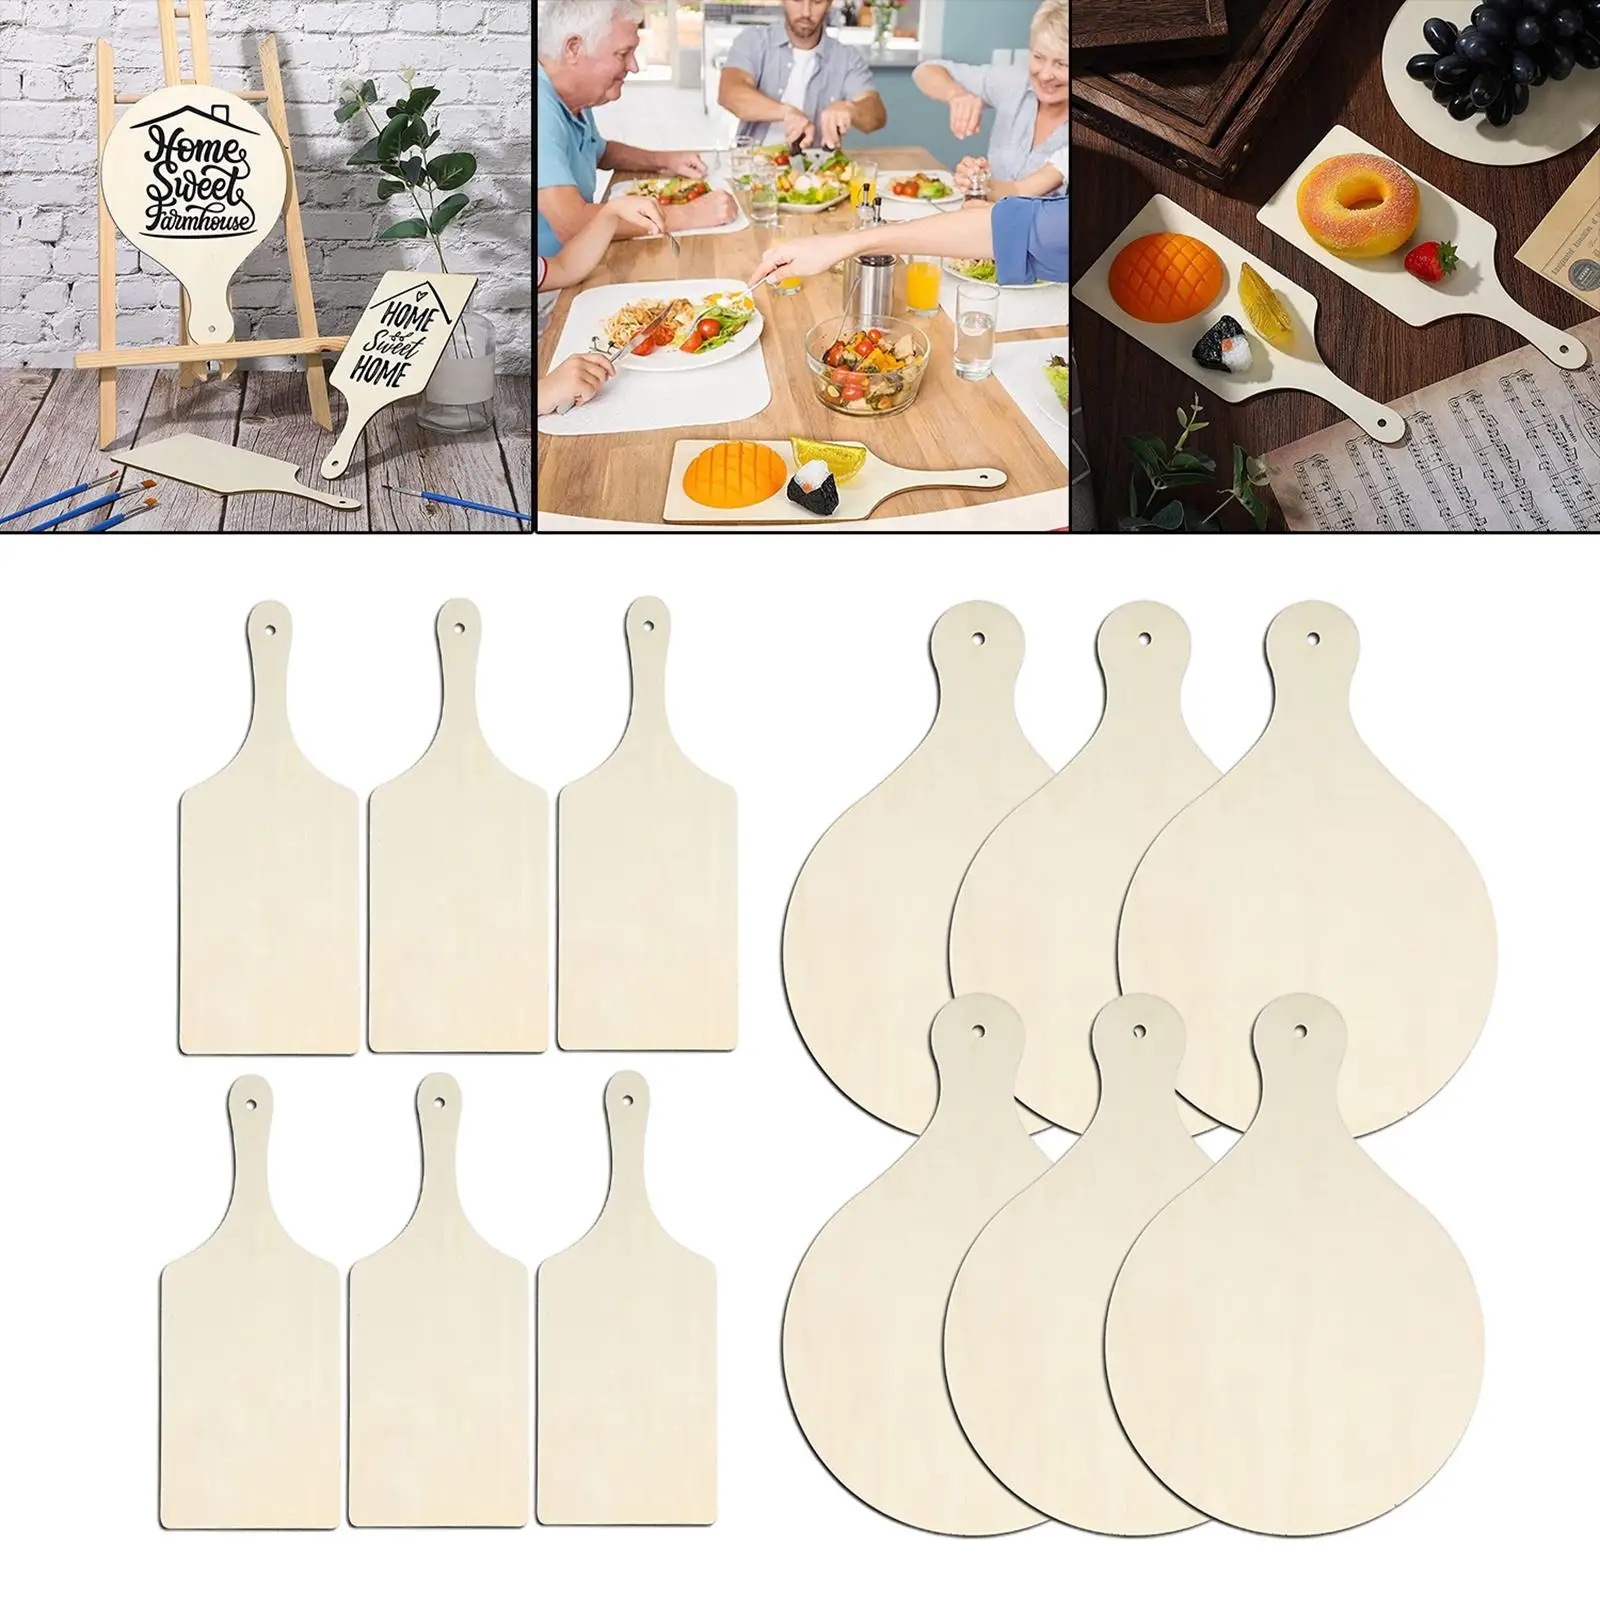 6x Natural Serving Tray  Cheese Board Table Centerpiece Paddle Rustic Unpainted Wooden Chopping Board for Meat Dinner Parties